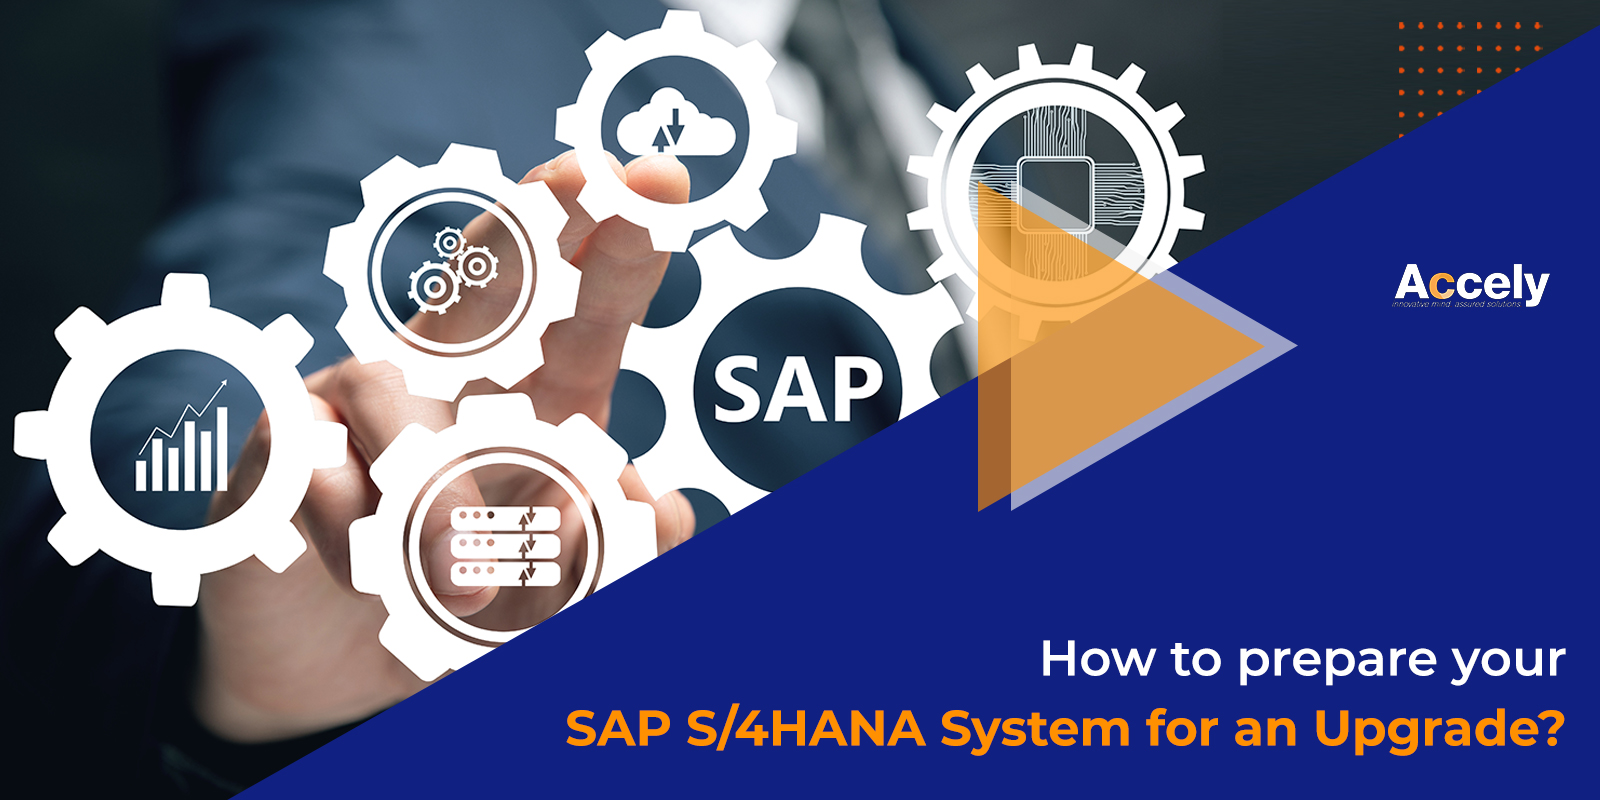 How to prepare your SAP S/4HANA System for an Upgrade?